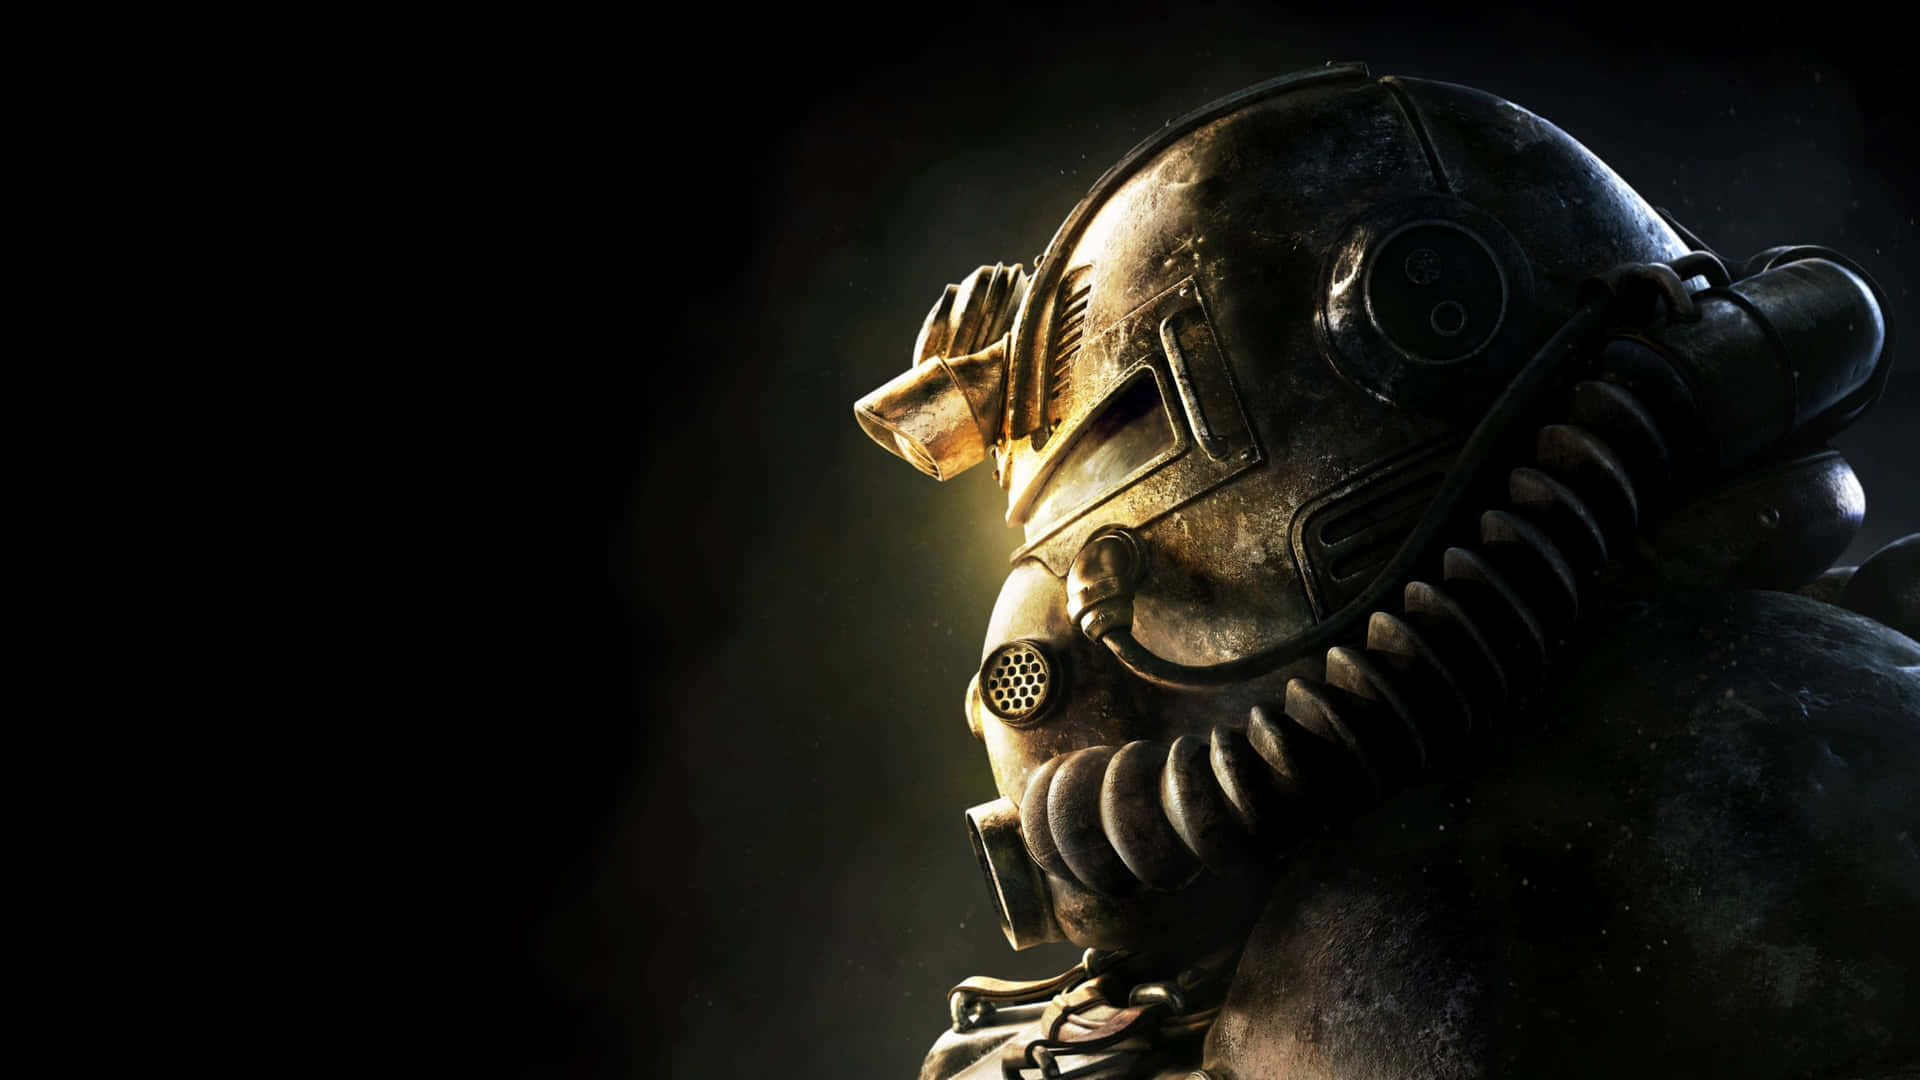 Intimidating Power Armor - Fallout 4 Wallpaper